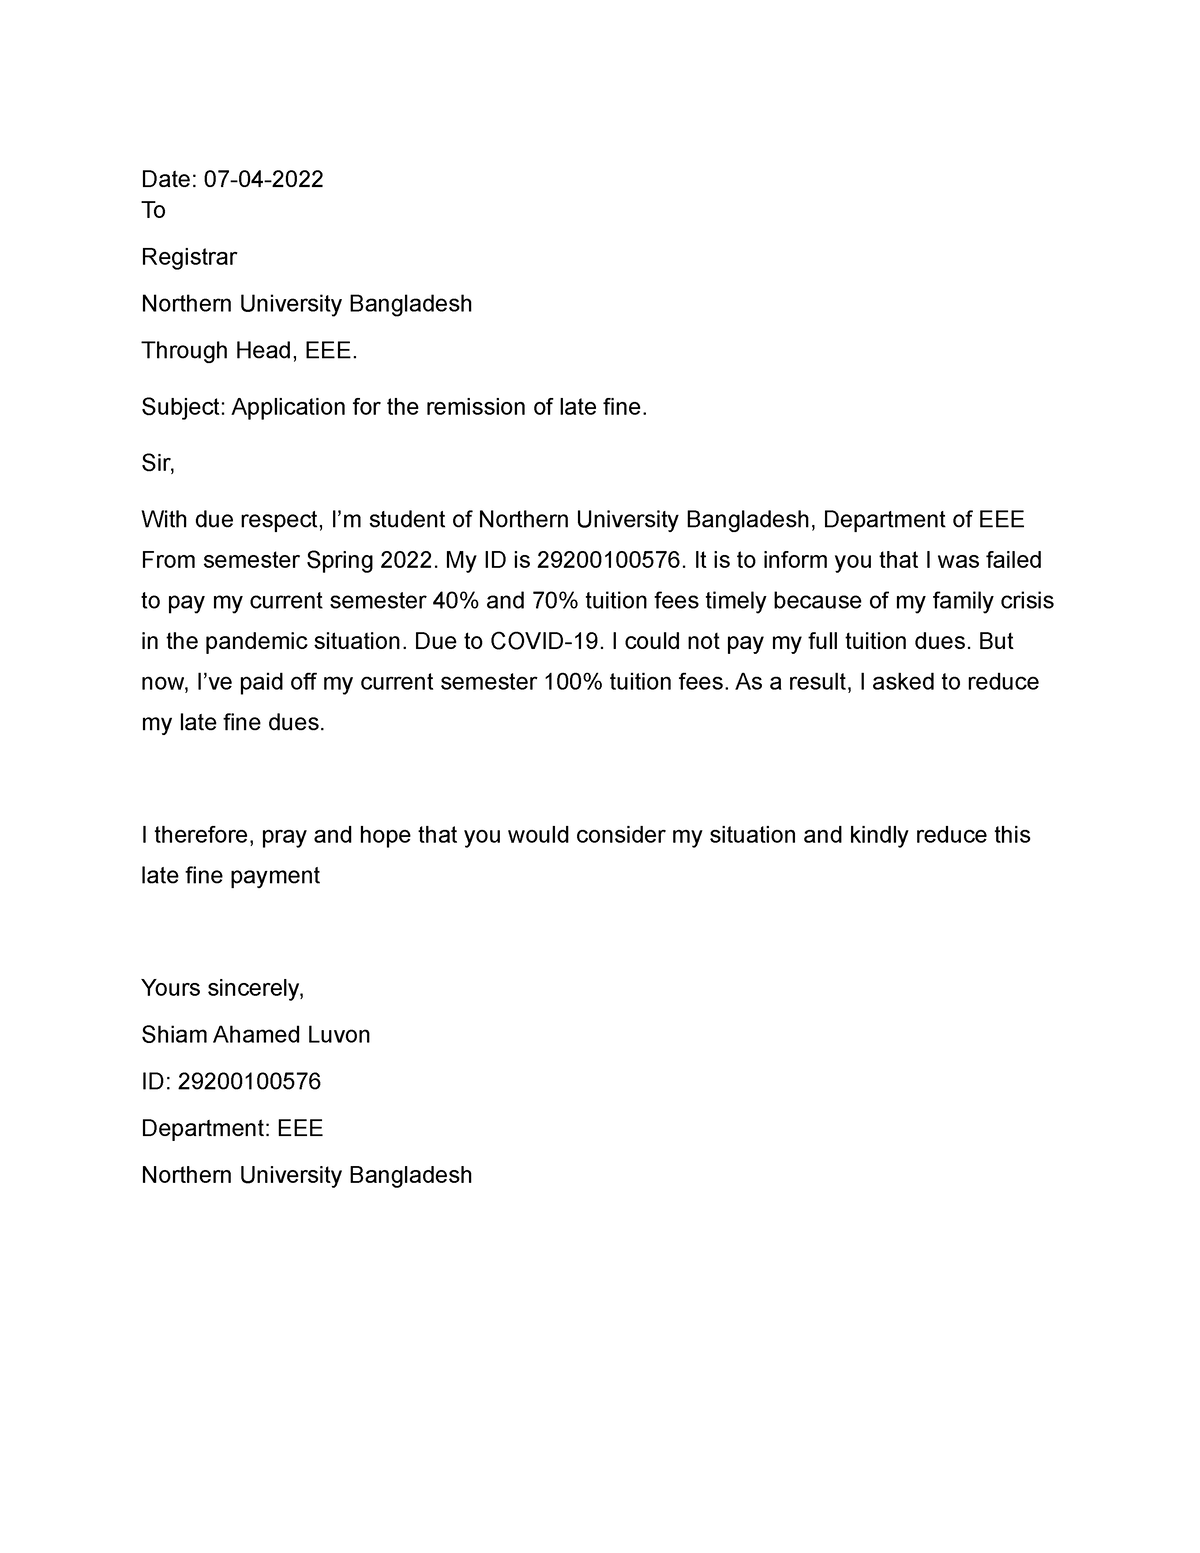 Application for Late fine - Date: 07-04- To Registrar Northern ...